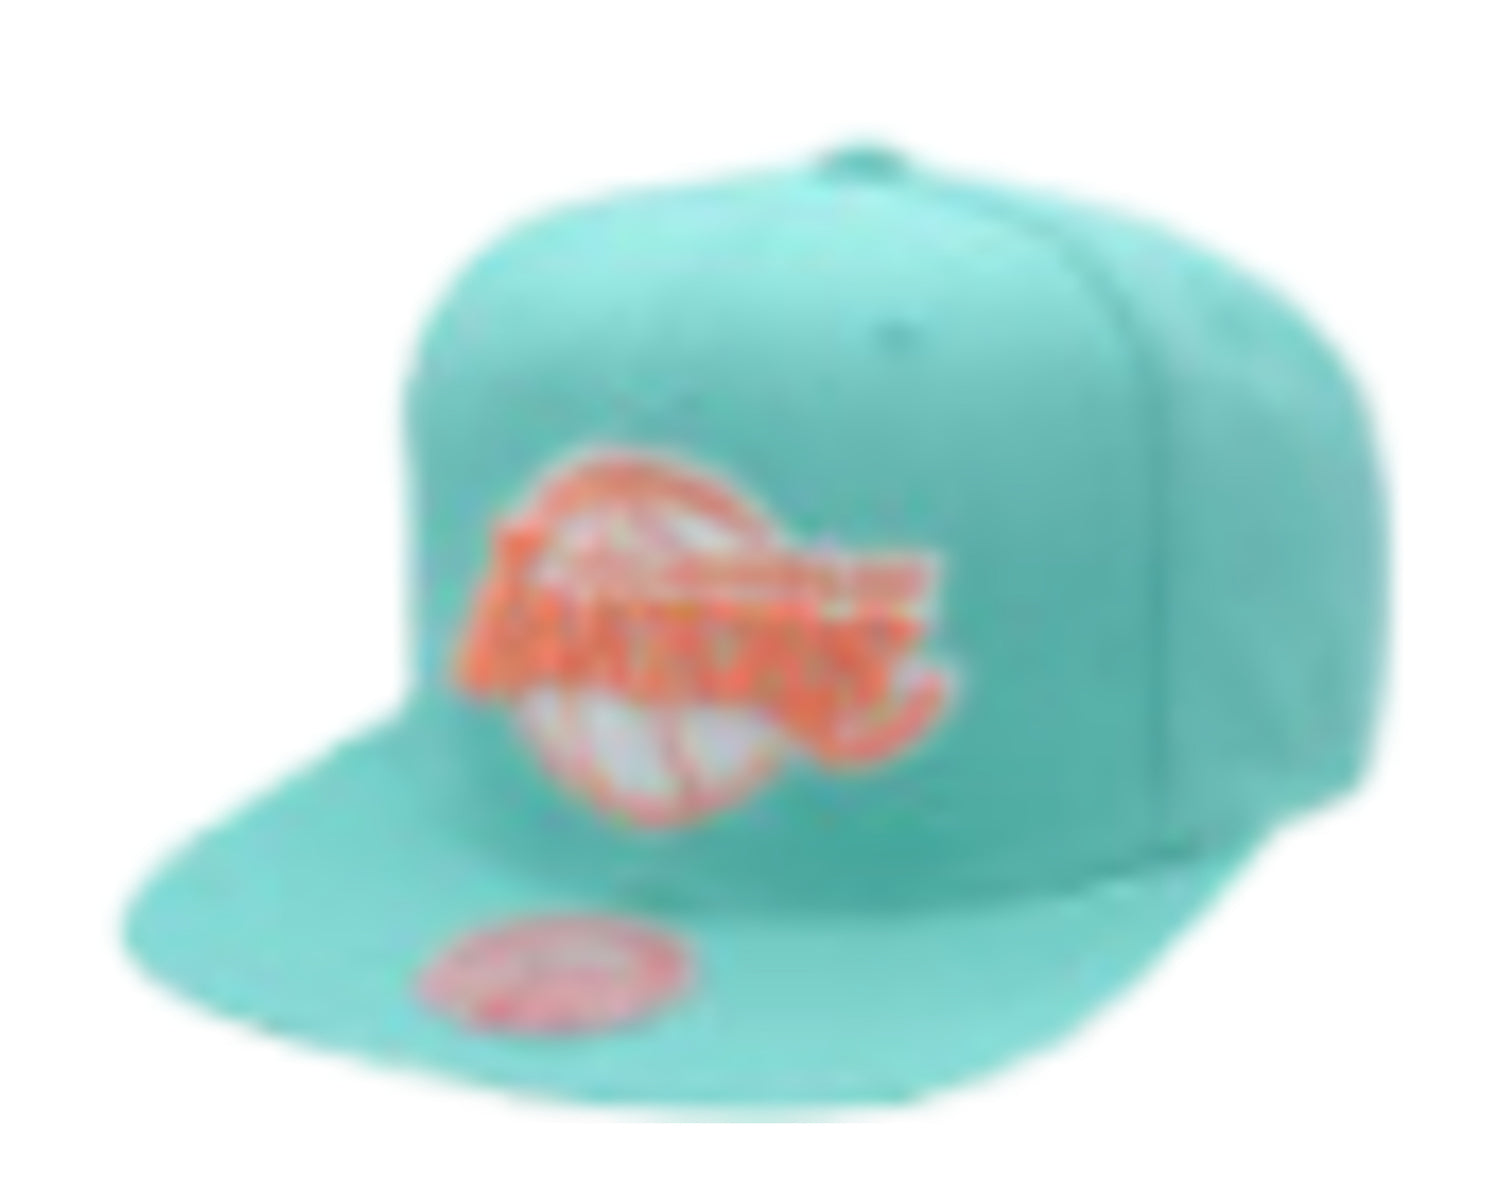 Mitchell & Ness NBA Los Angeles Lakers Ocean Dreams 2010 Finals Patch Snapback Hat